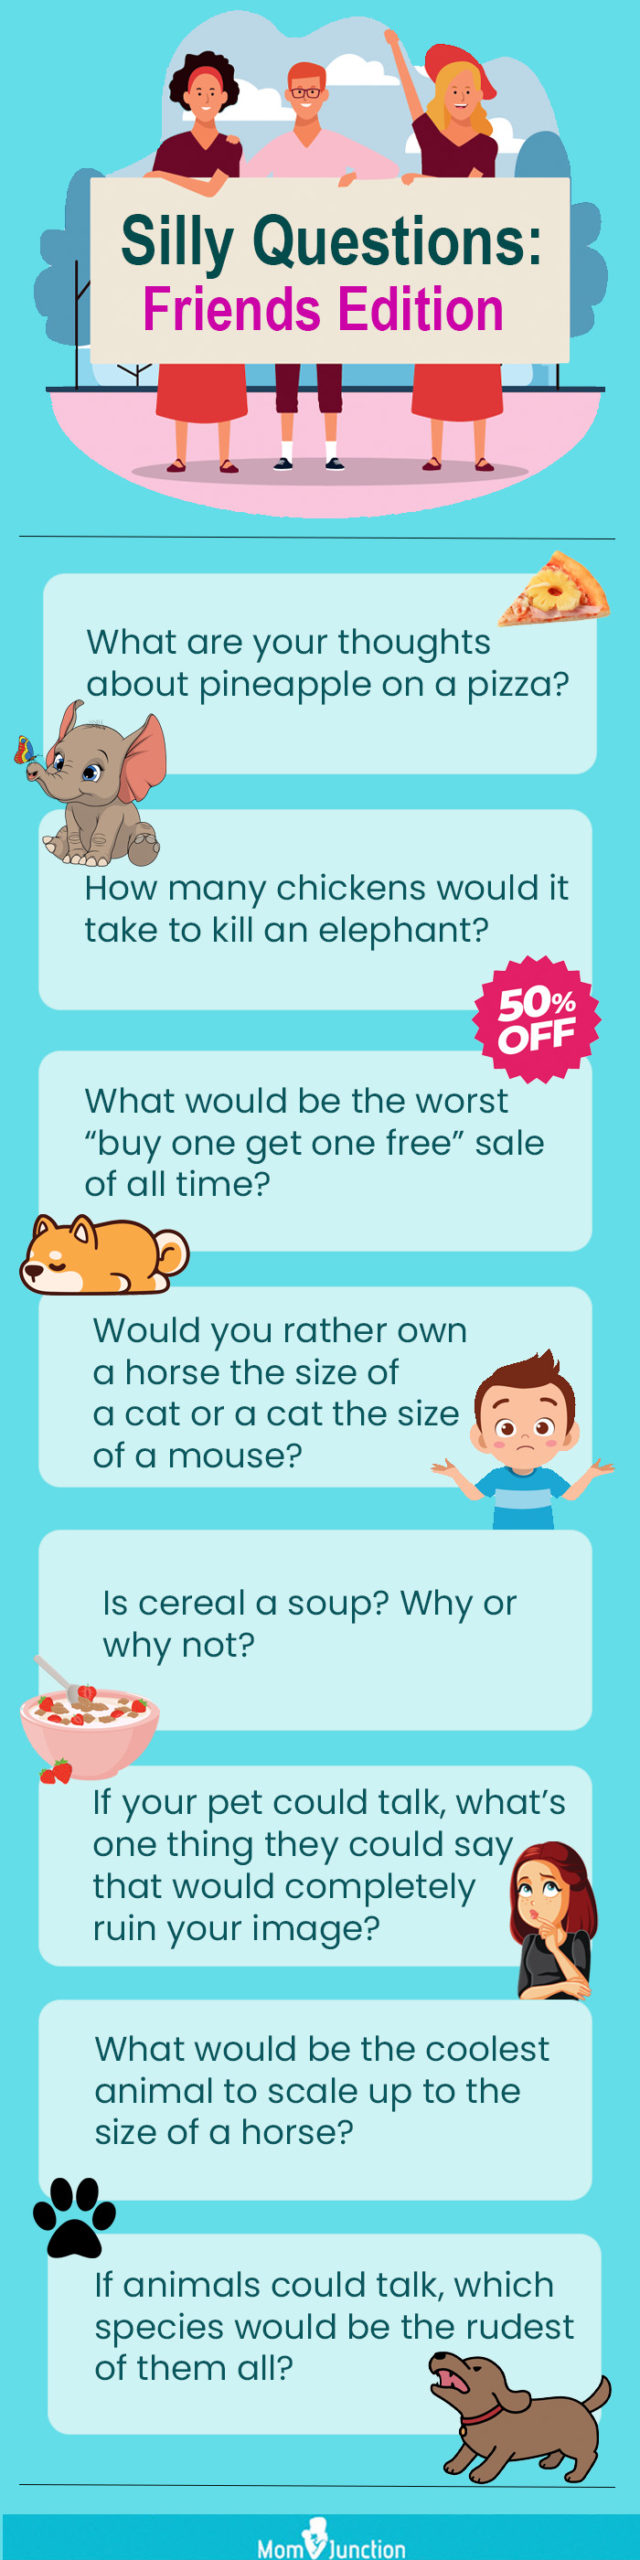 silly questions for friends (infographic)